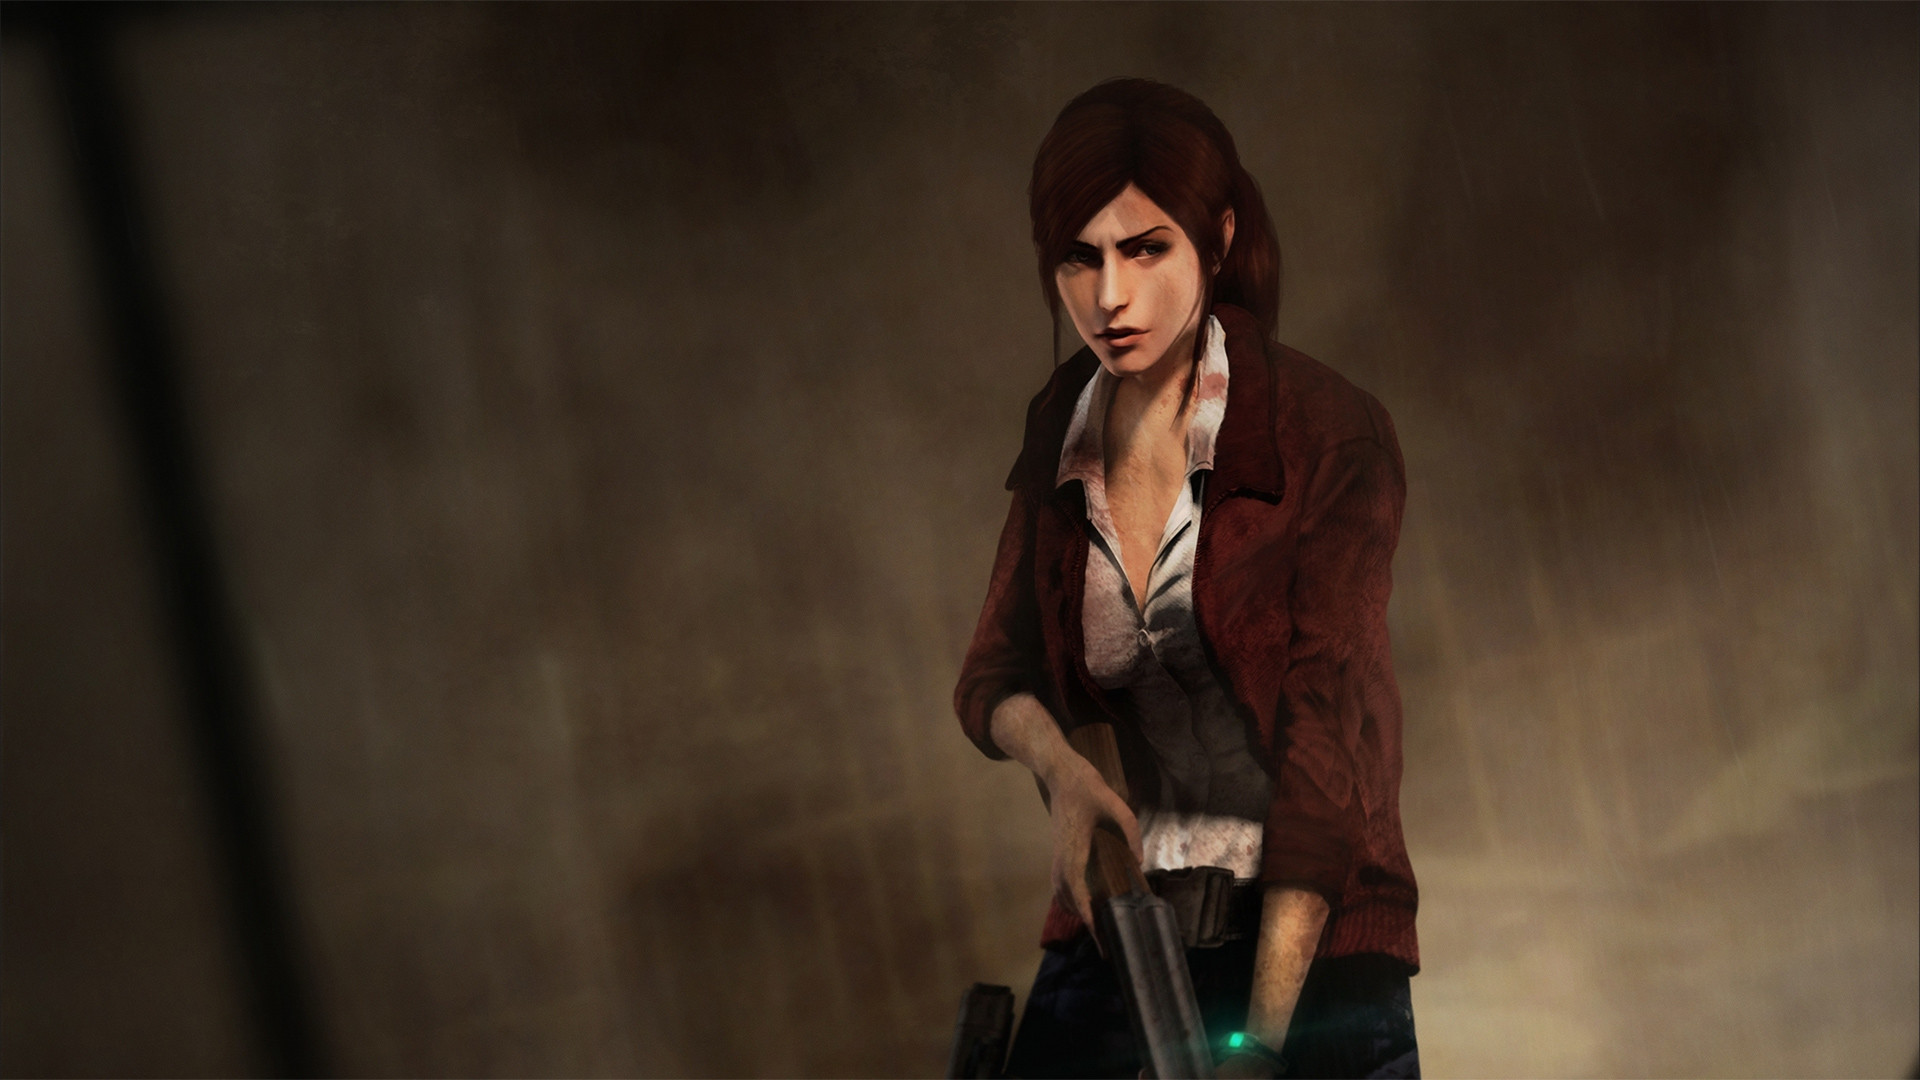 1920x1080 Claire Redfield Wallpaper from Resident Evil: Revelations 2